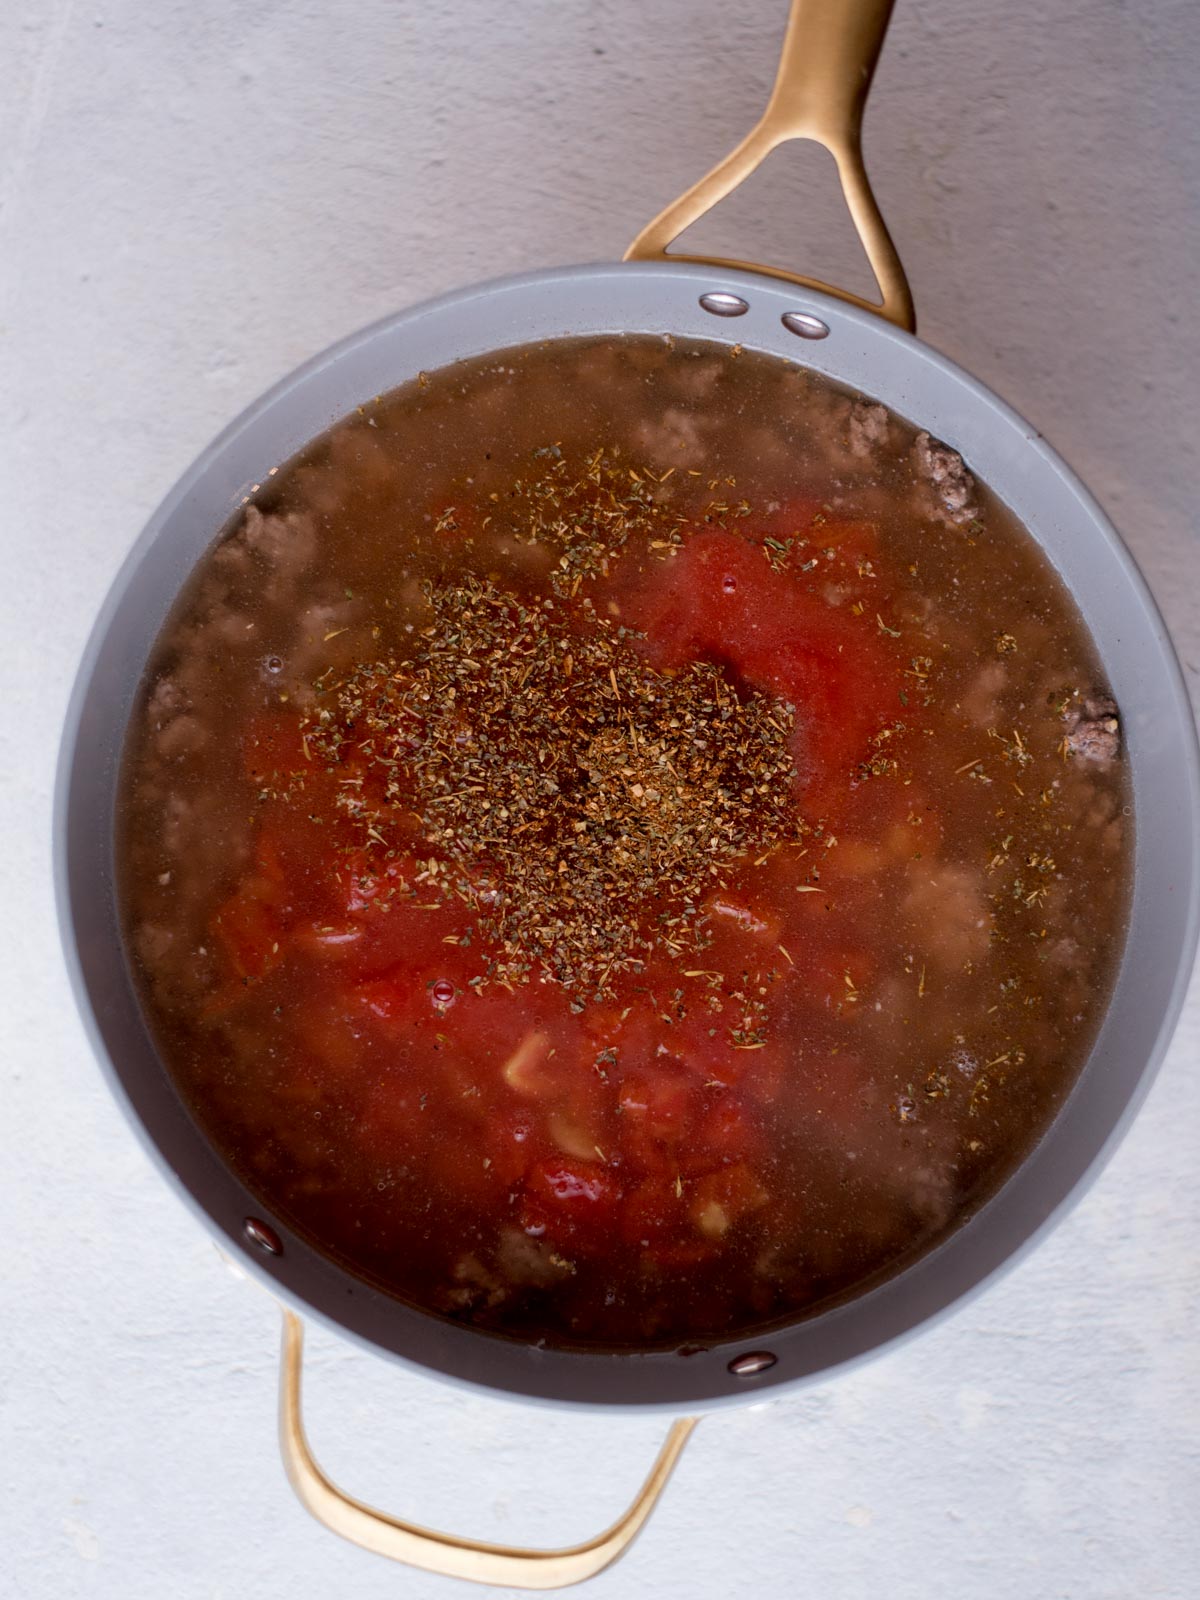 tomato sauce, water, bouillon, and seasoning added to the cooked ground beef